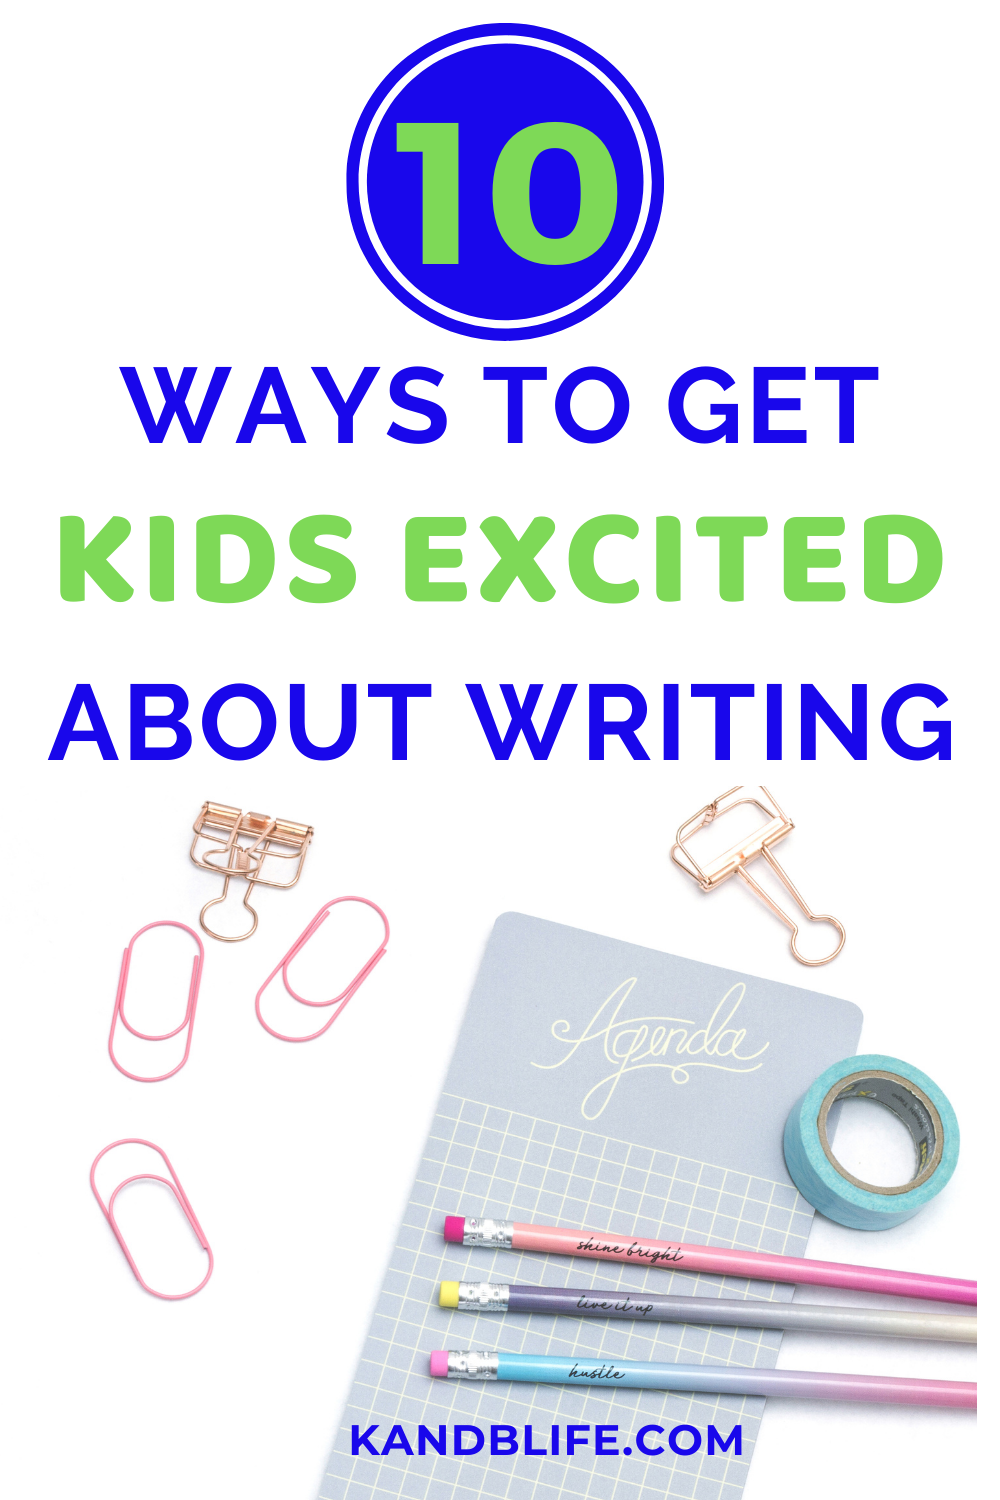 Paper, paperclips and pencils for the article, 10 ways to get kids excited about writing.